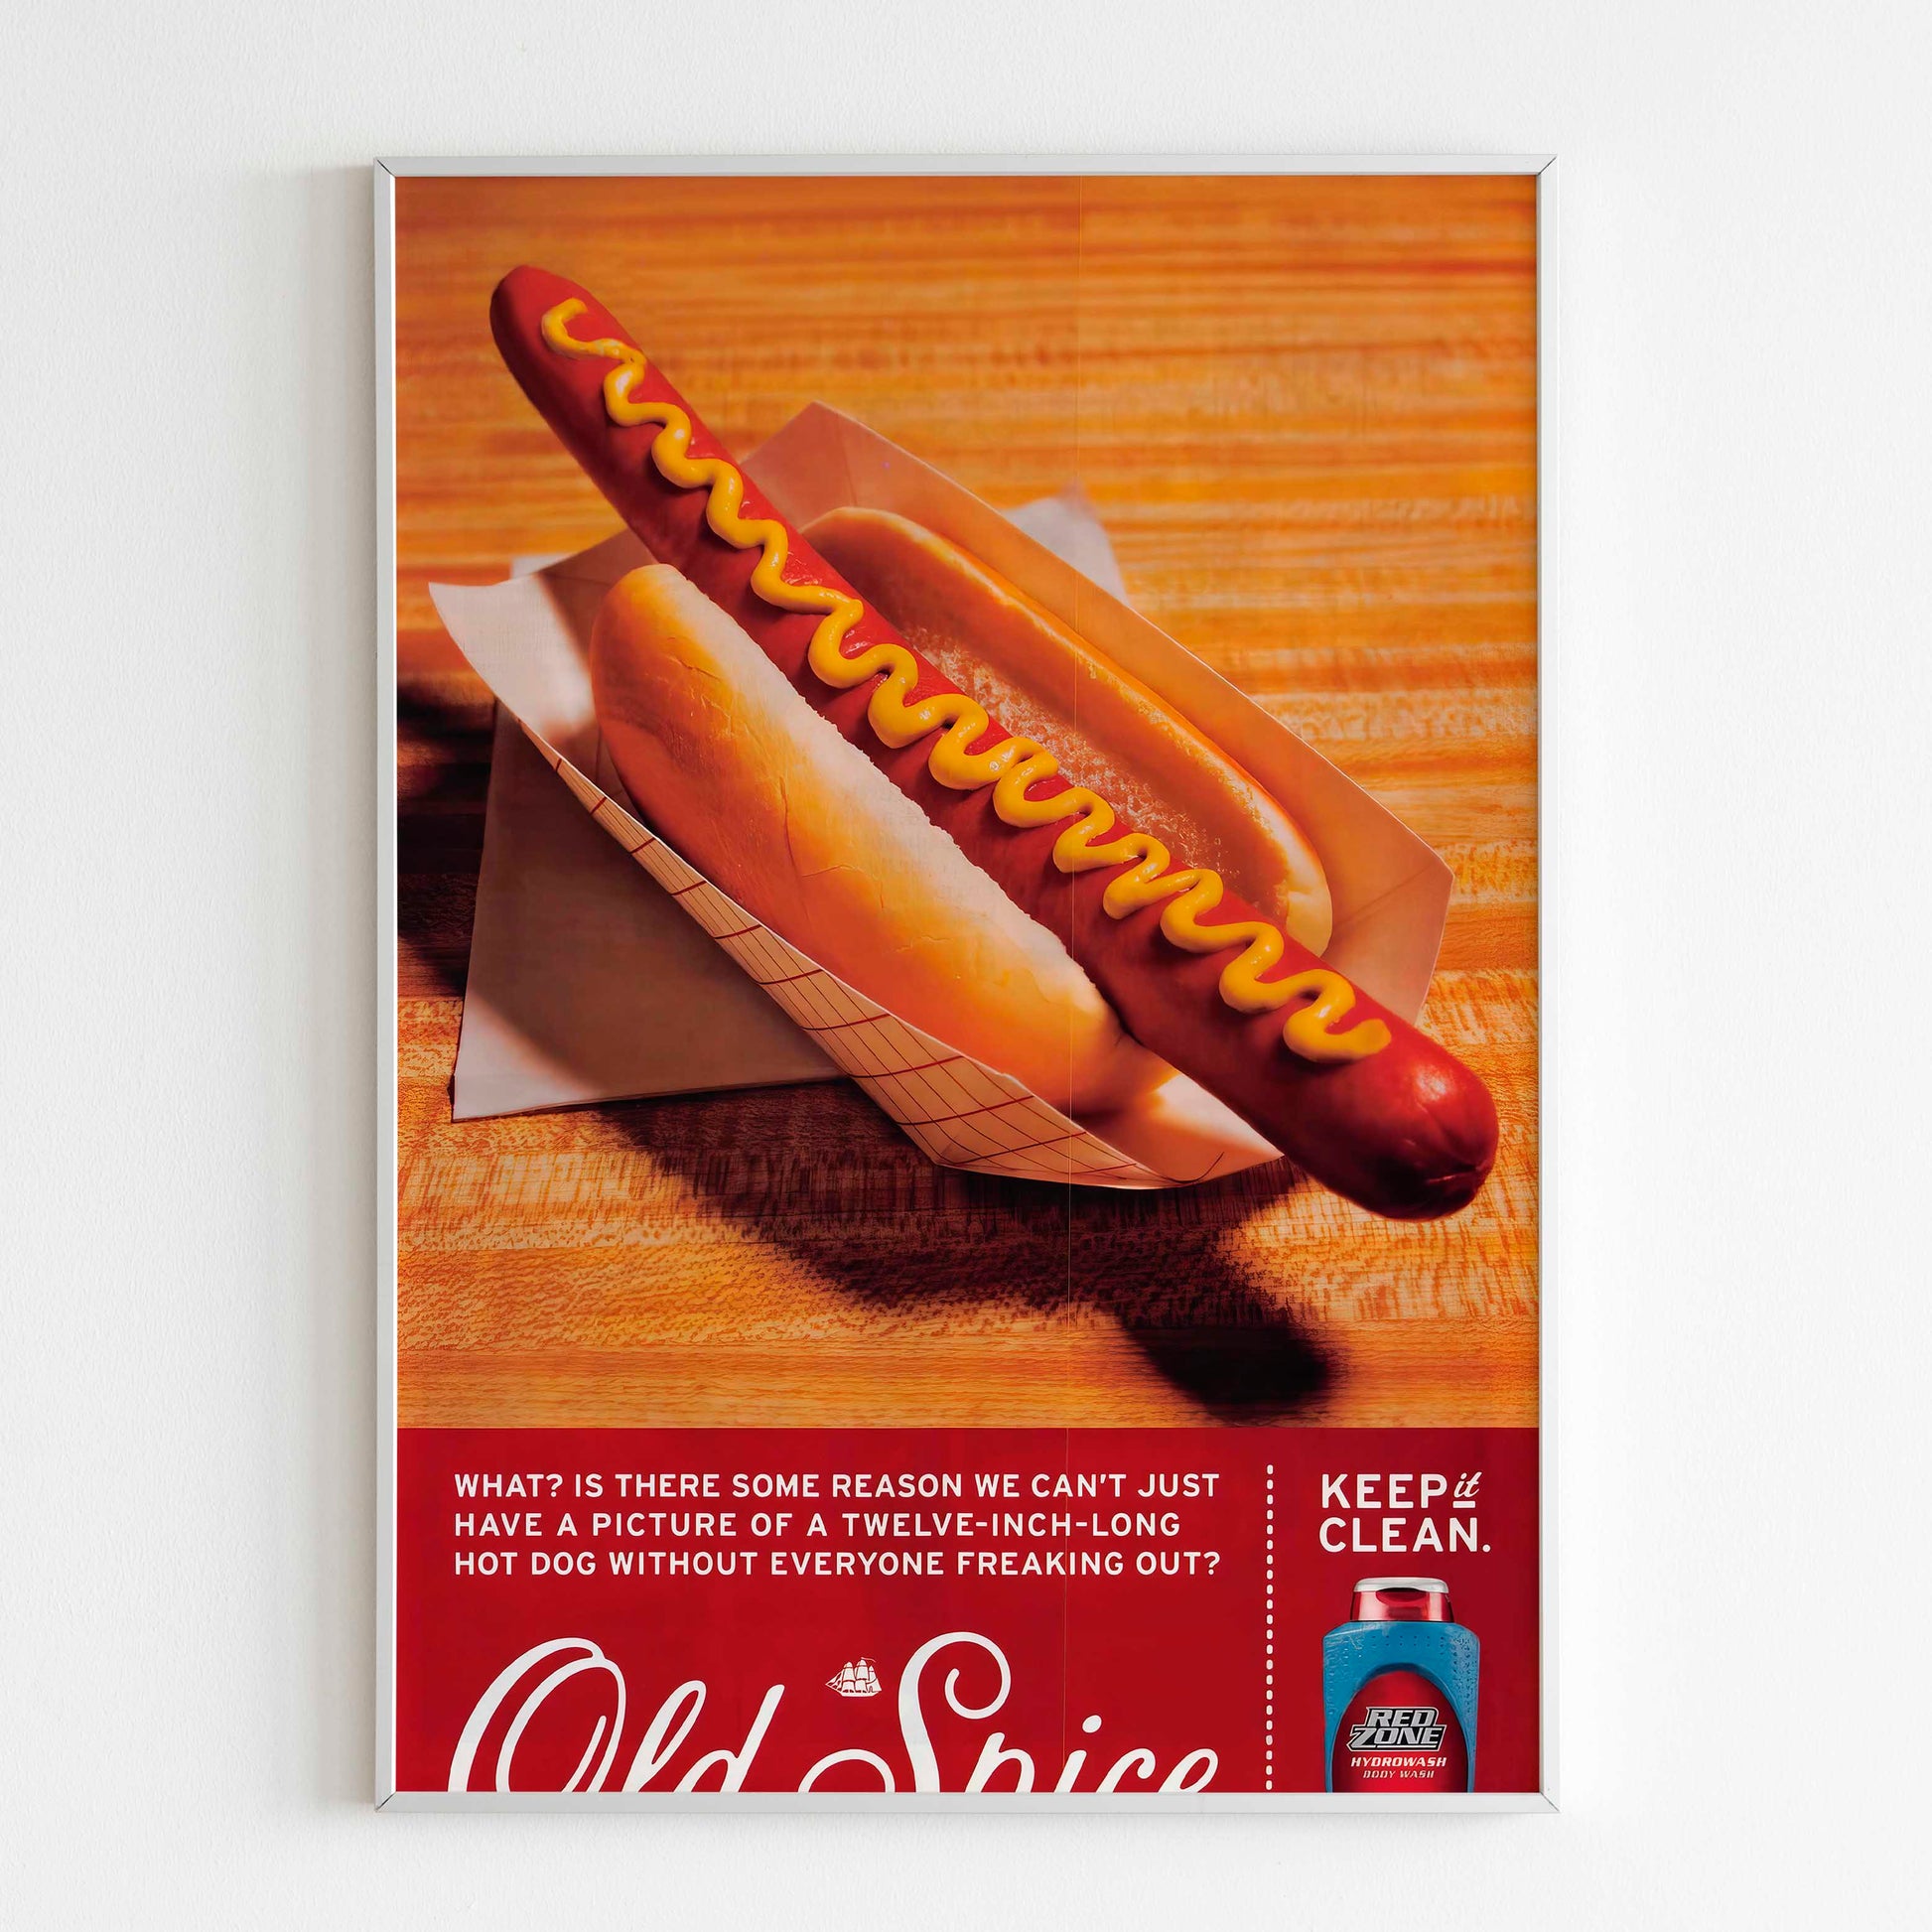 2000s Old Spice Hot Dog Advertising Poster, 00's Style Print, Ad Wall Art, Vintage Design Advertisement, Magazine Ad Retro Poster